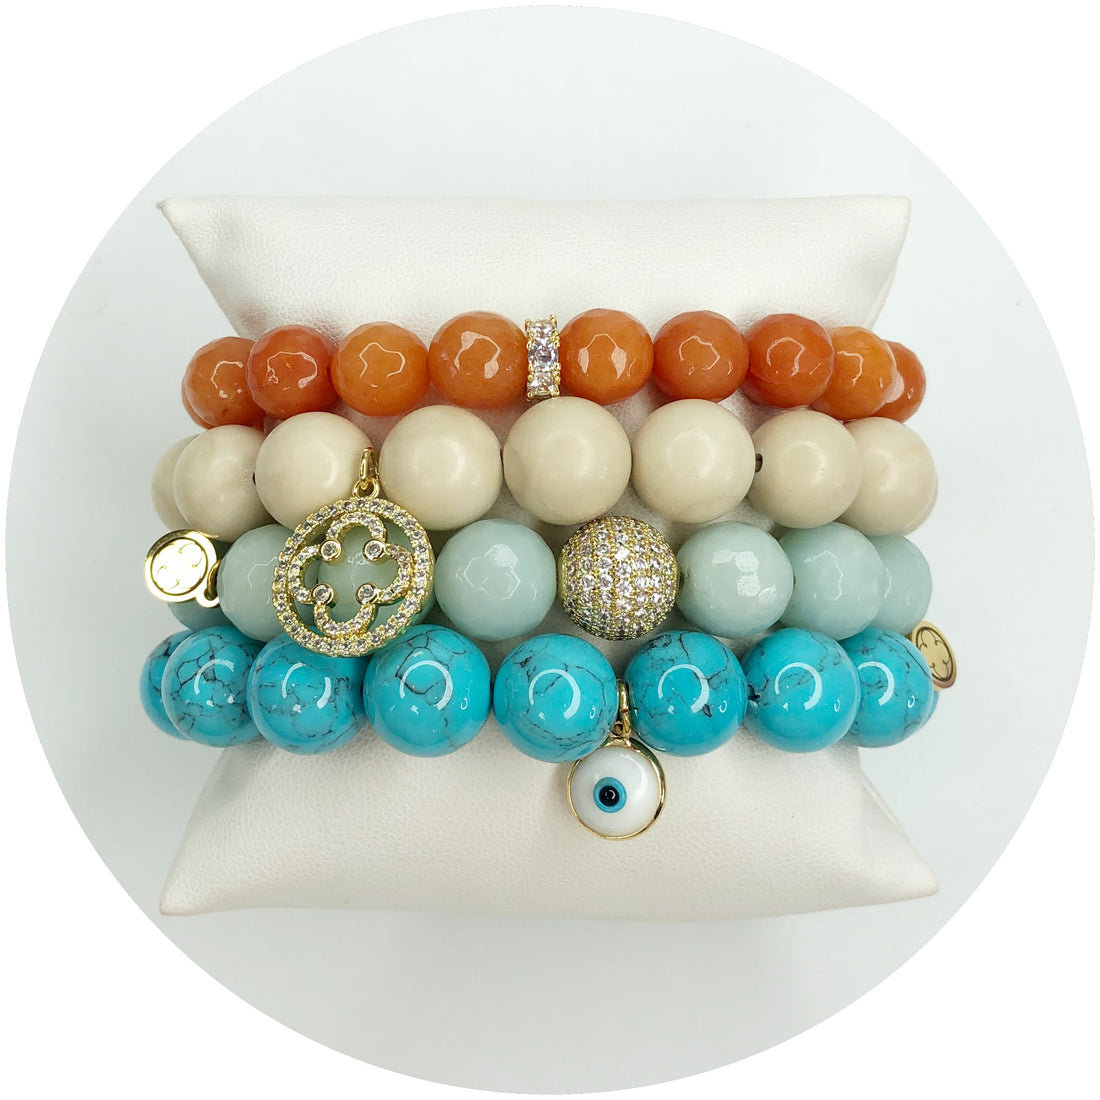 Creamsicle Armparty